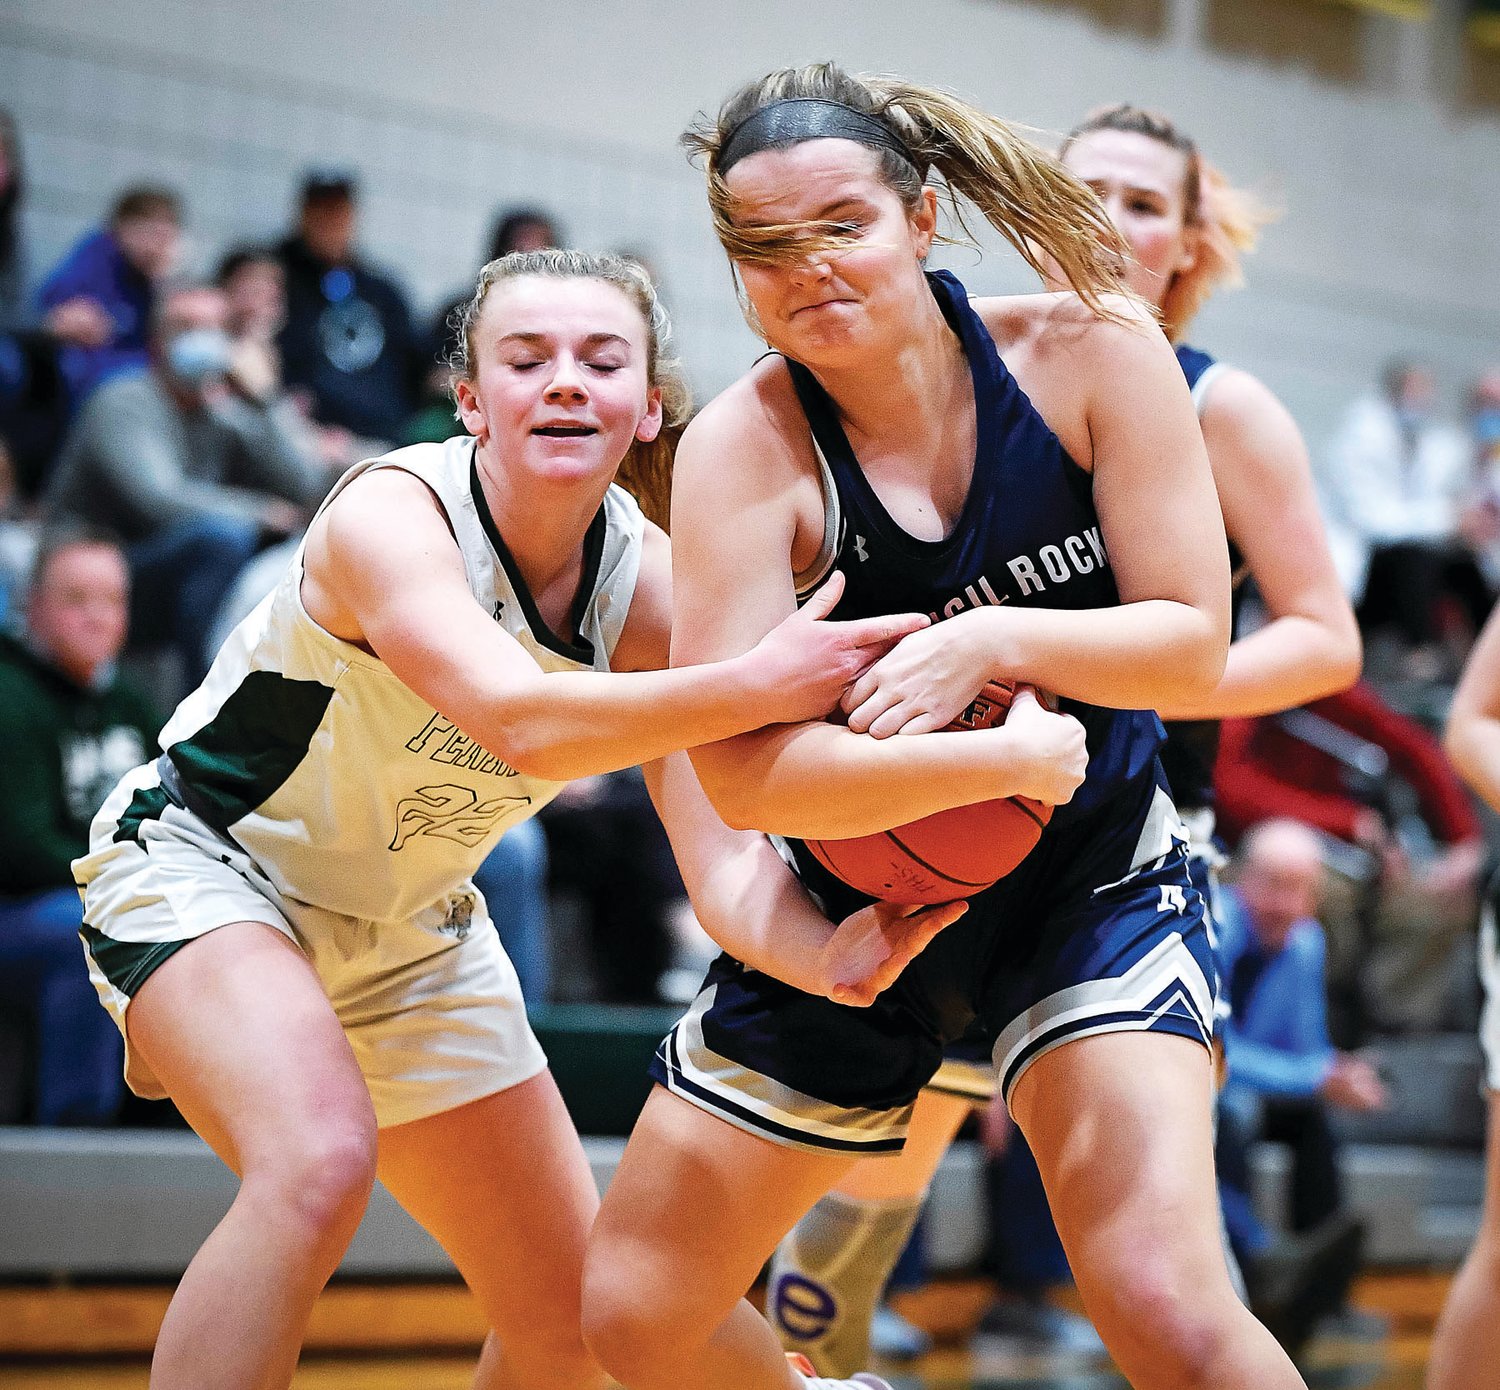 CR North’s Kristen Polinsky secures a rebound midway through the first half in front of Pennridge’s Emma Pyne.